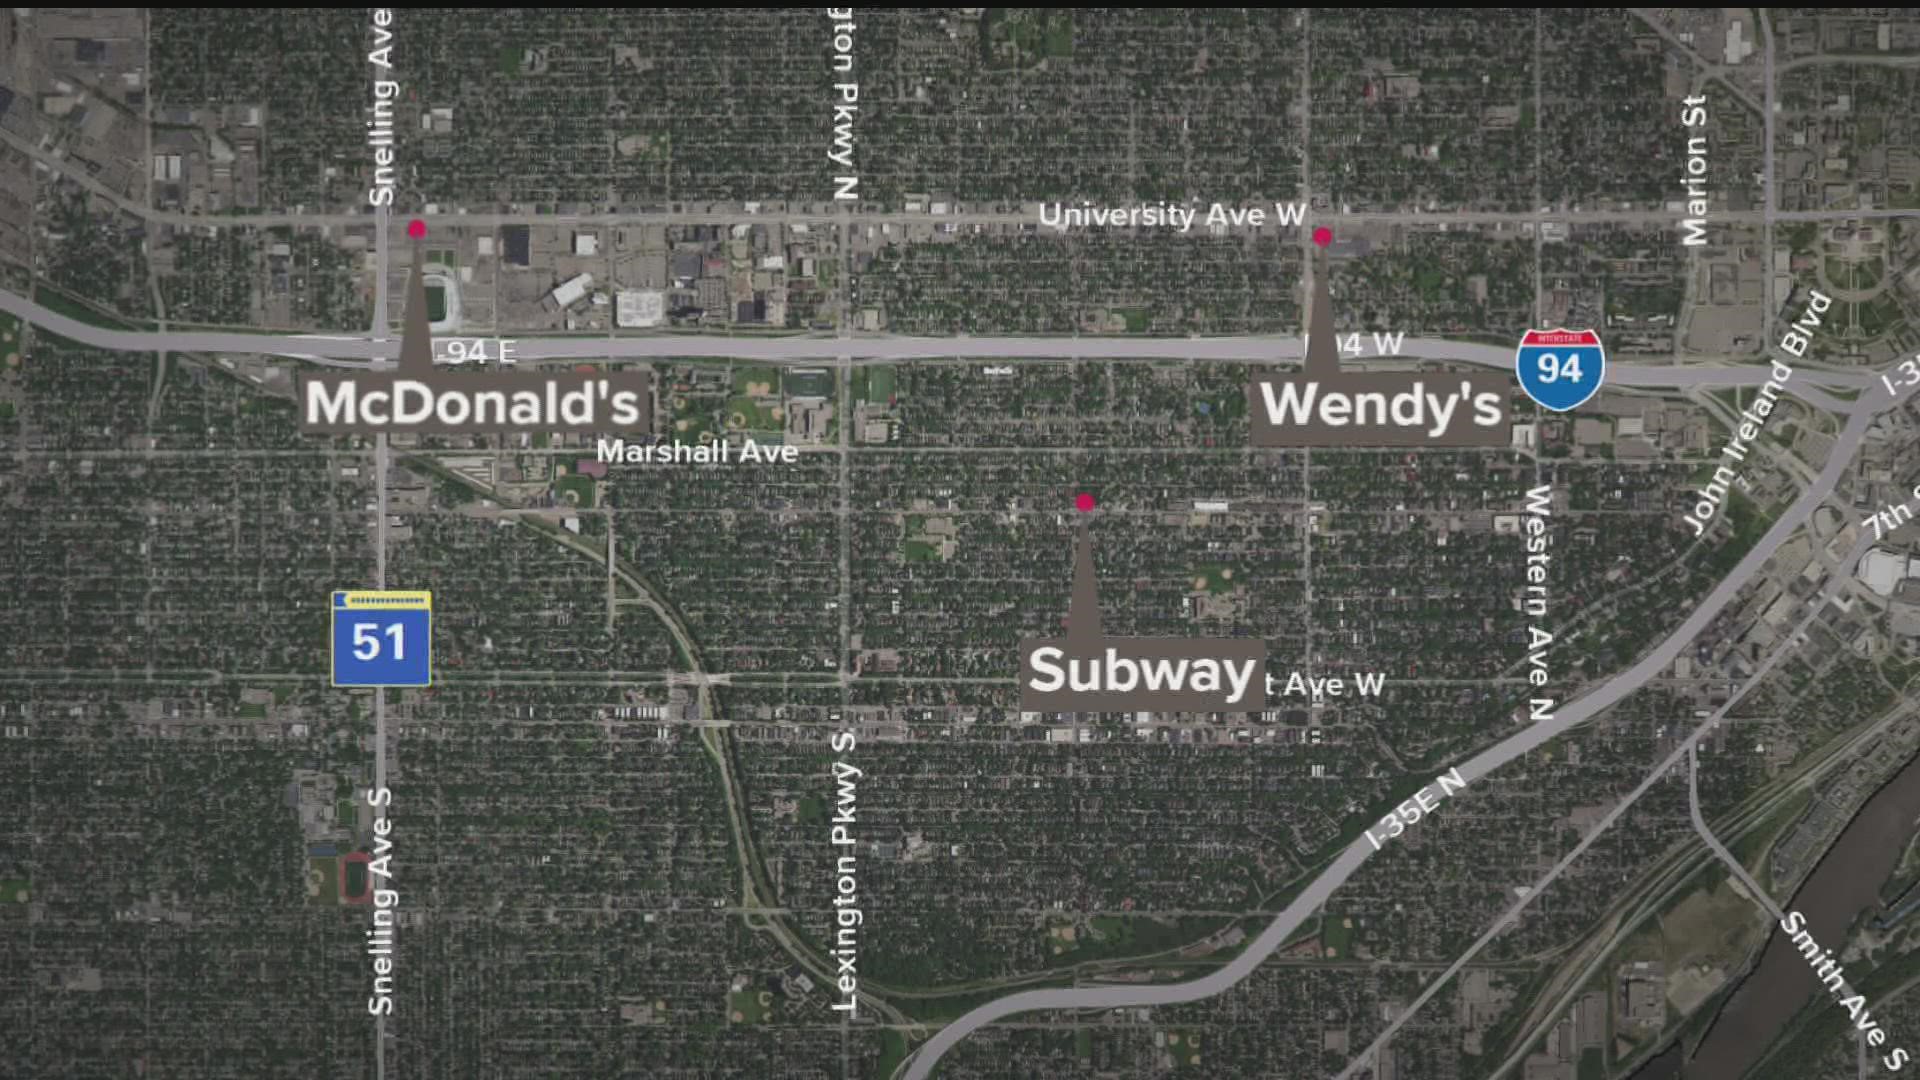 According to the St. Paul Police Department, a Wendy's, Subway and McDonald's were robbed between 7:15 p.m. and 8 p.m. Friday.